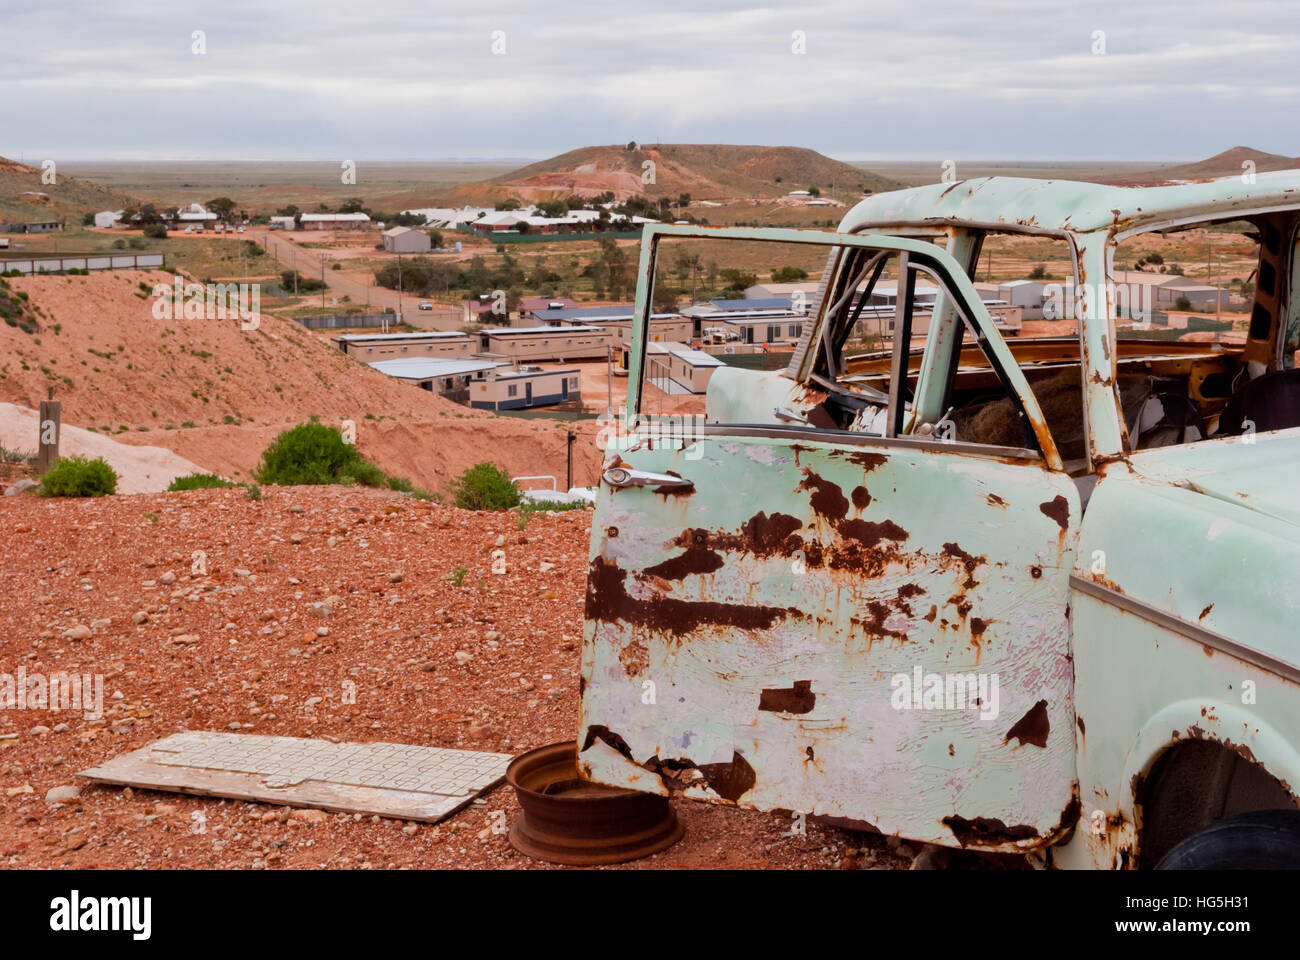 Abandoned rusty car in Coober Pedy, South Australia Stock Photo